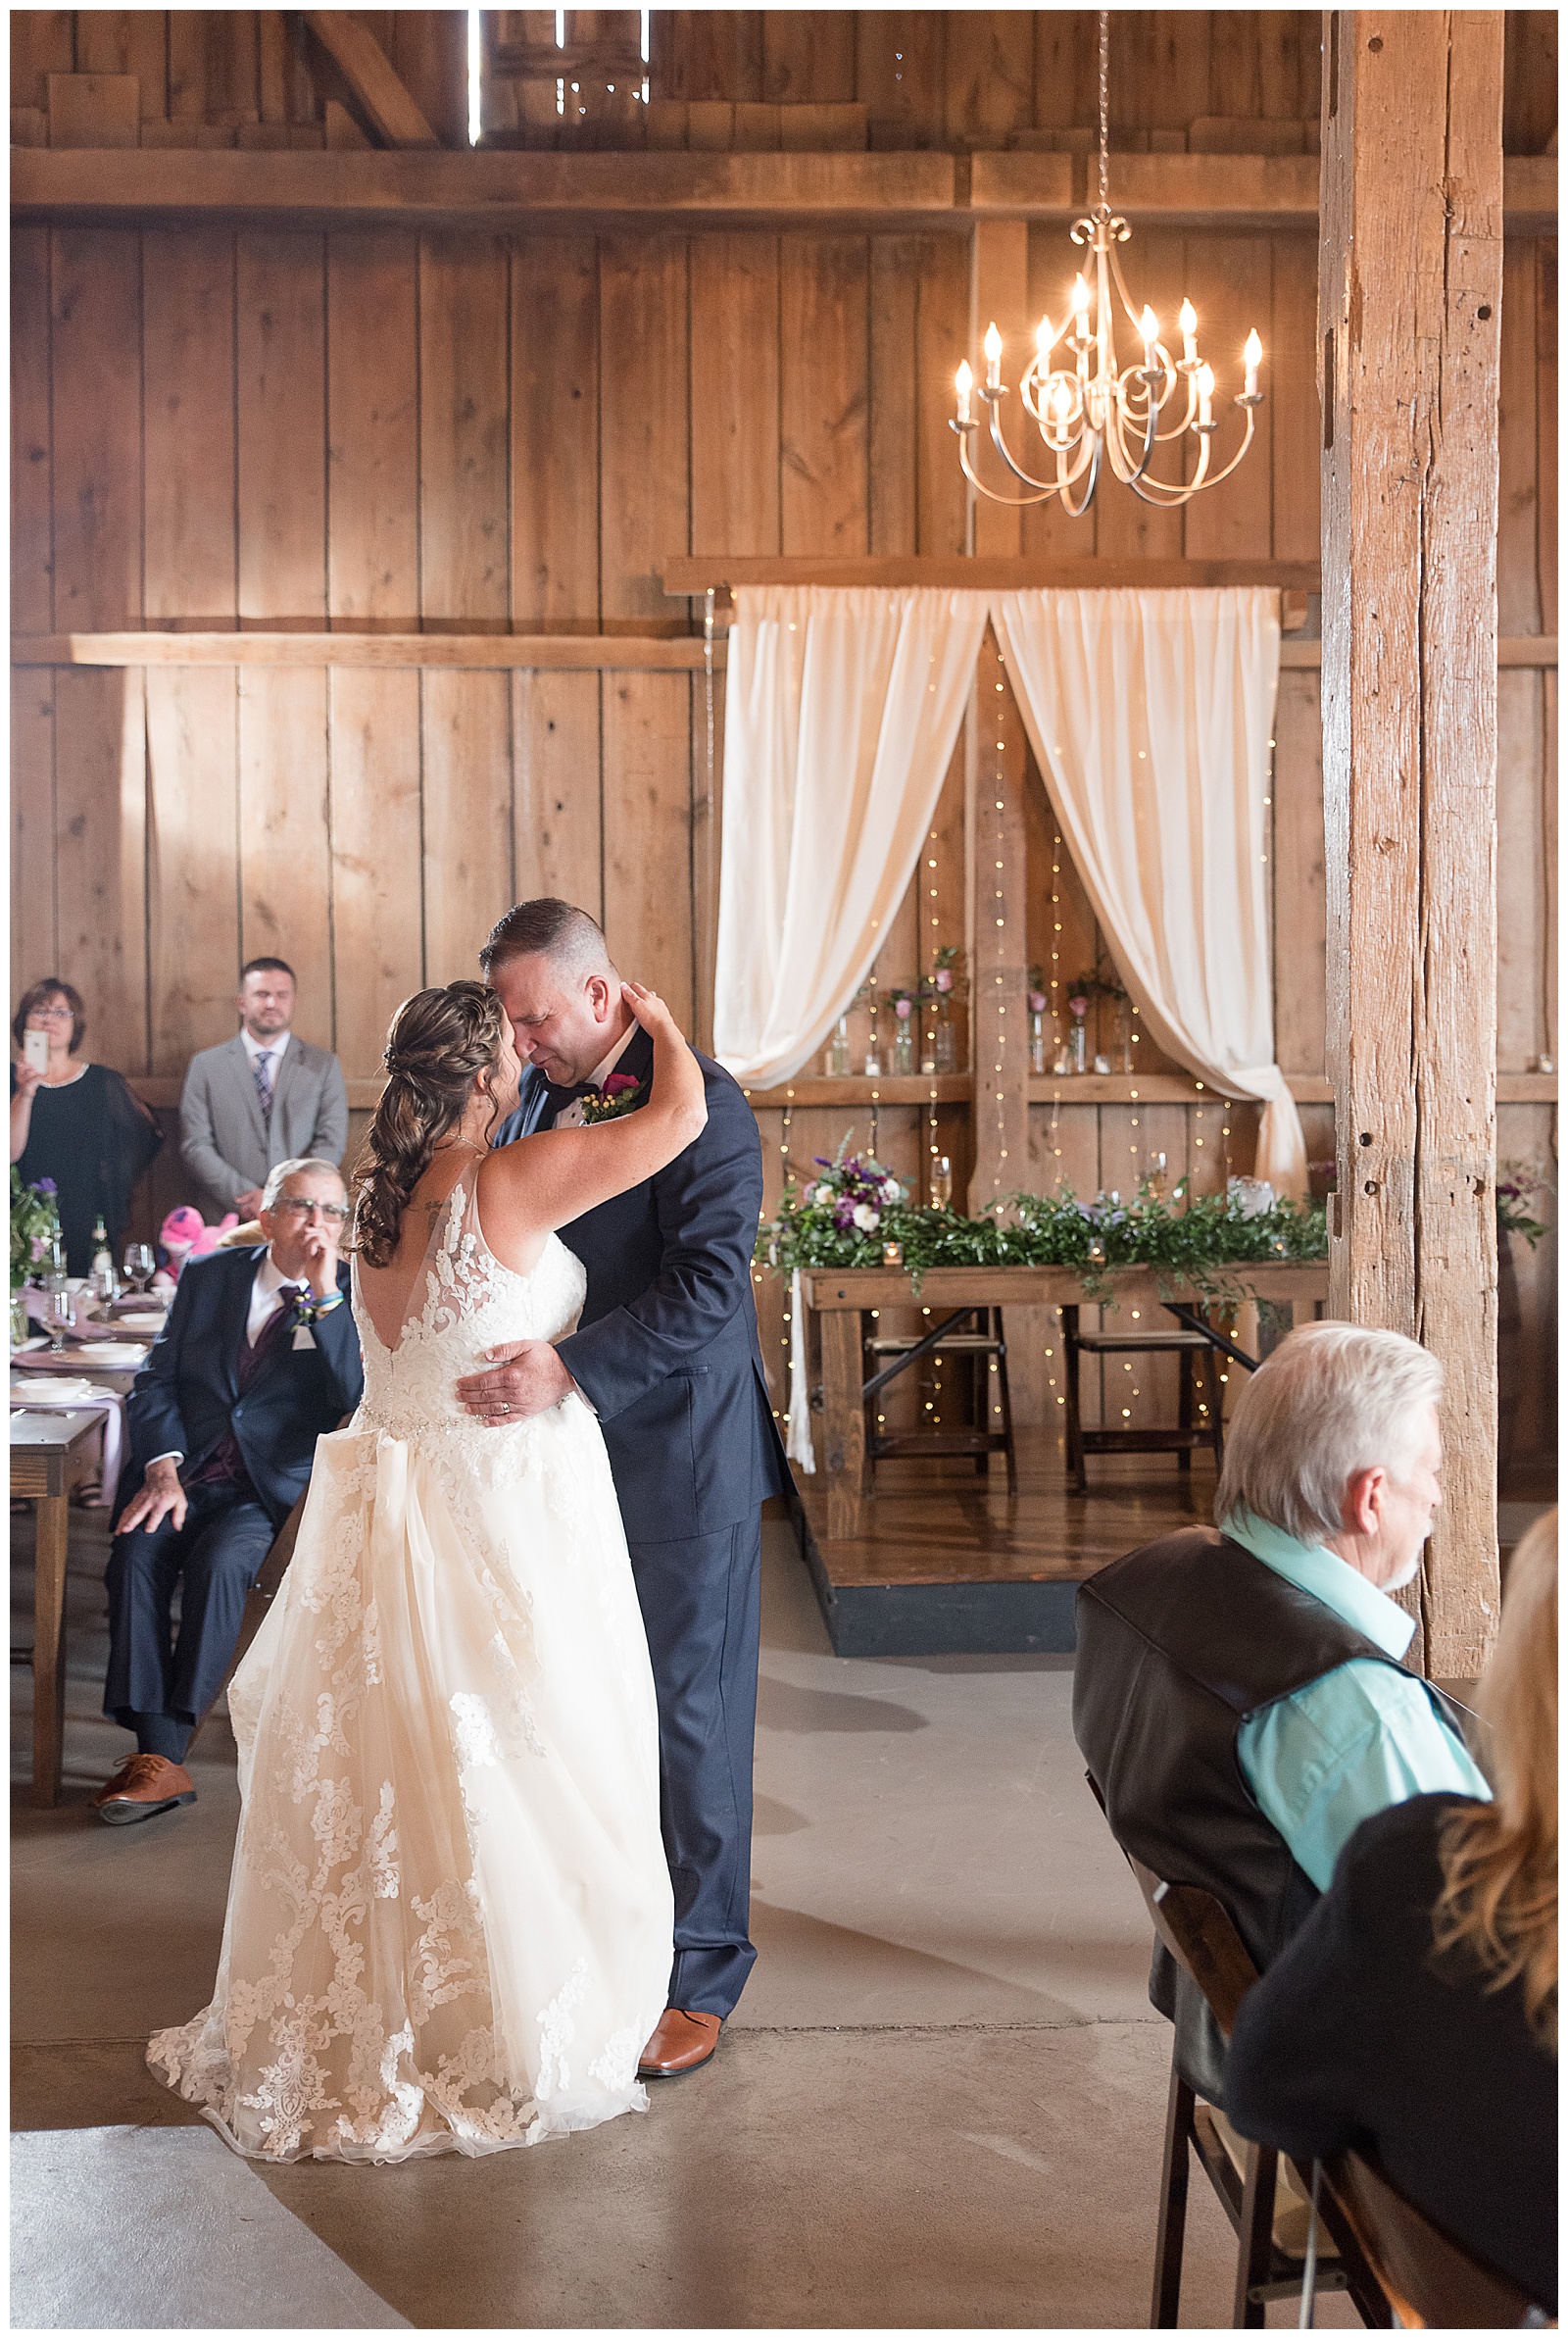 bride and groom sharing first dance in rustic wood barn venue in Lancaster, PA